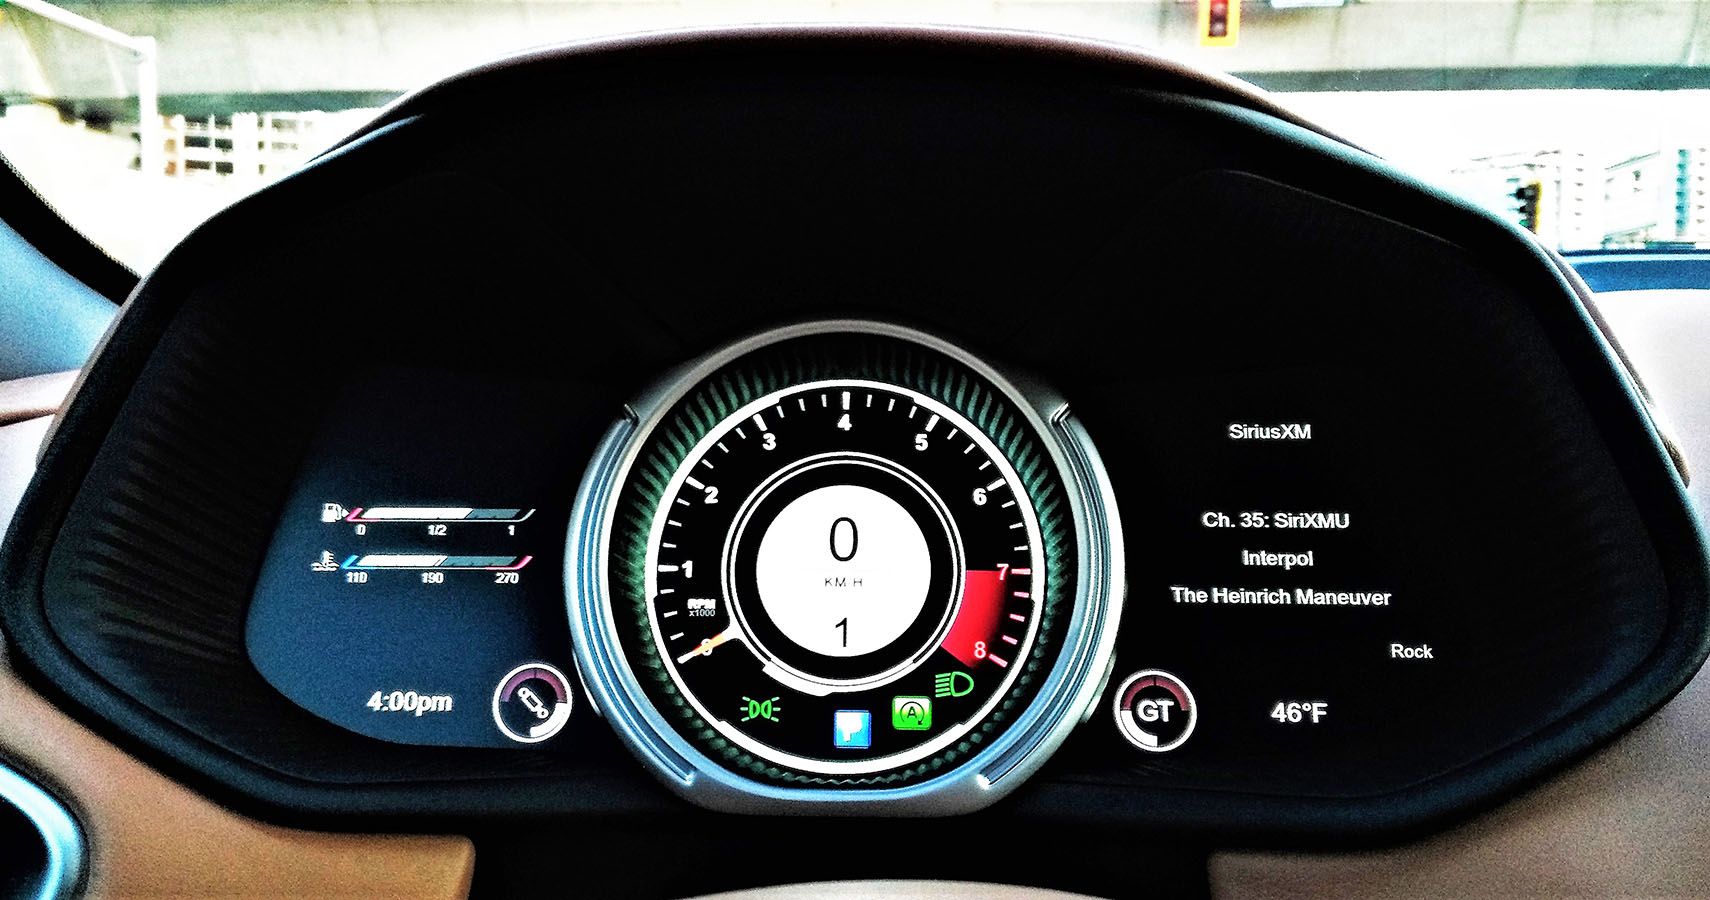 The gauge cluster is purely digital now.